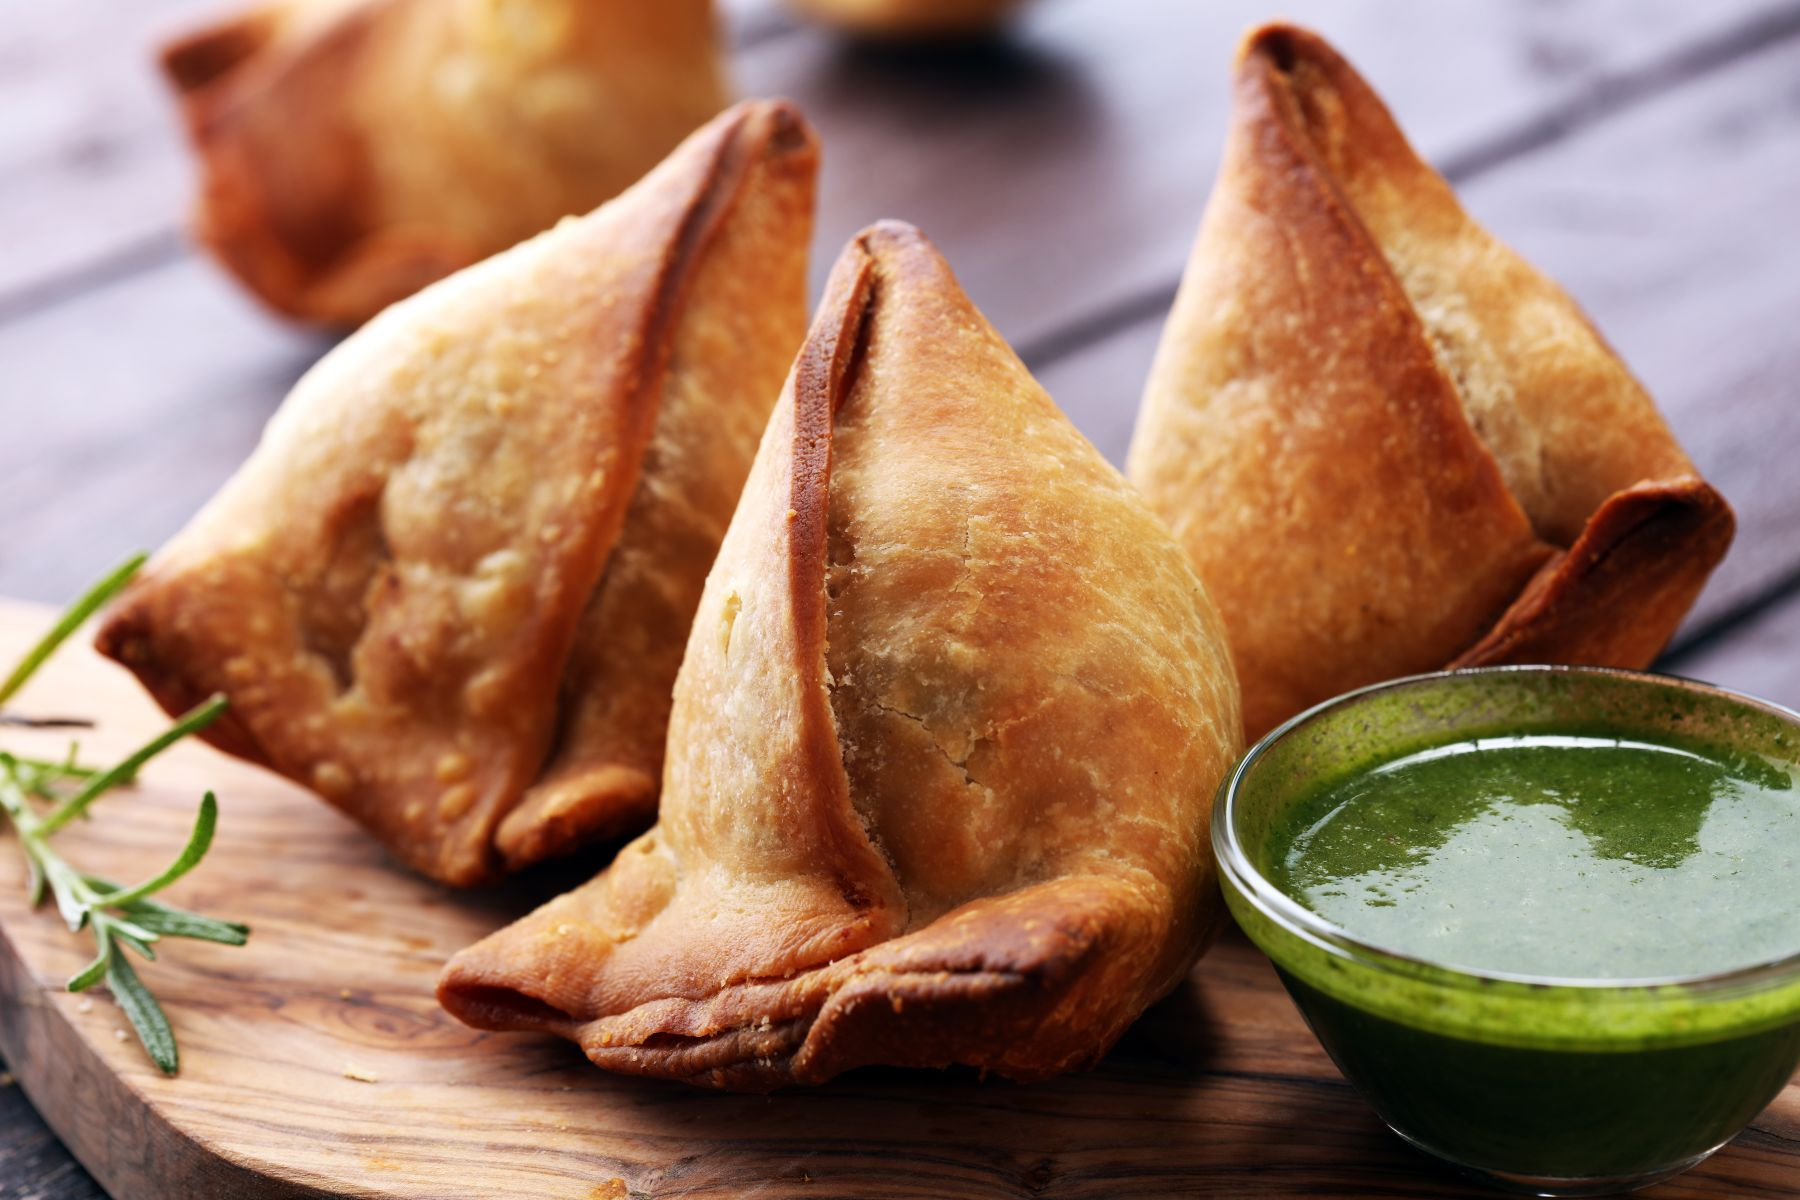 Vegetable Samosa order from Himalaya Granville for Indian Dinner Party at home.